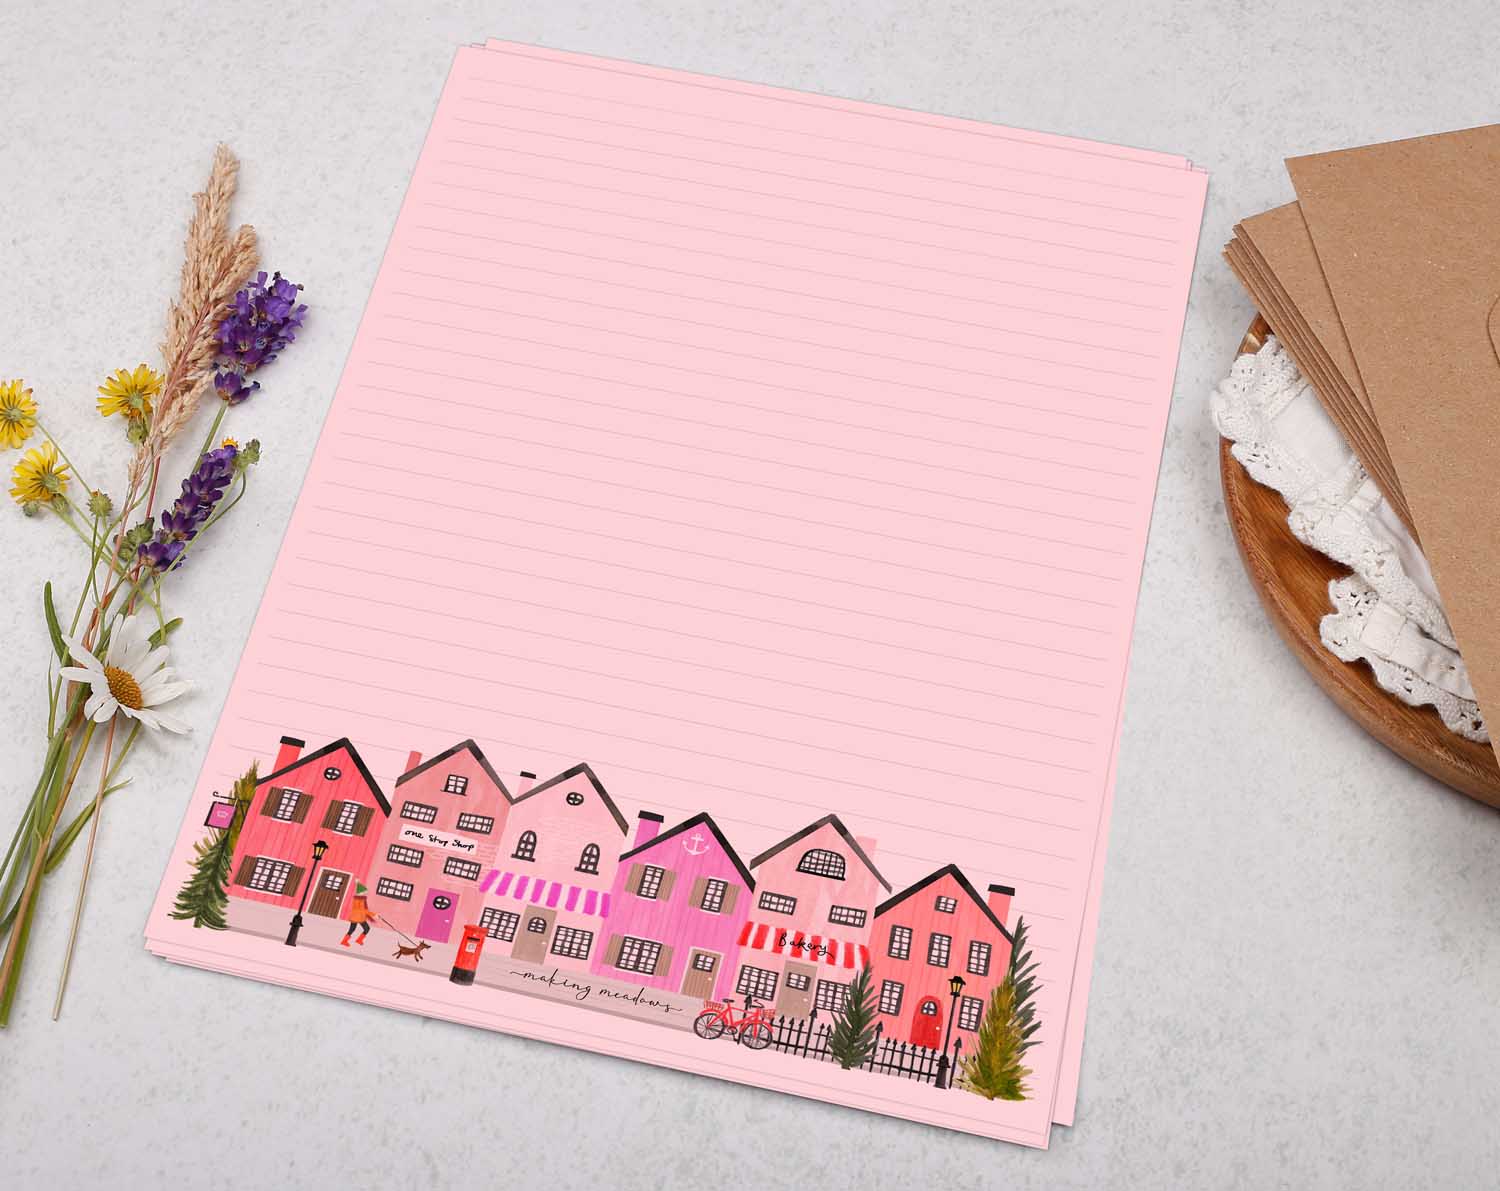 Pink A4 letter writing paper sheets with a Cute Town Village House watercolour border design.